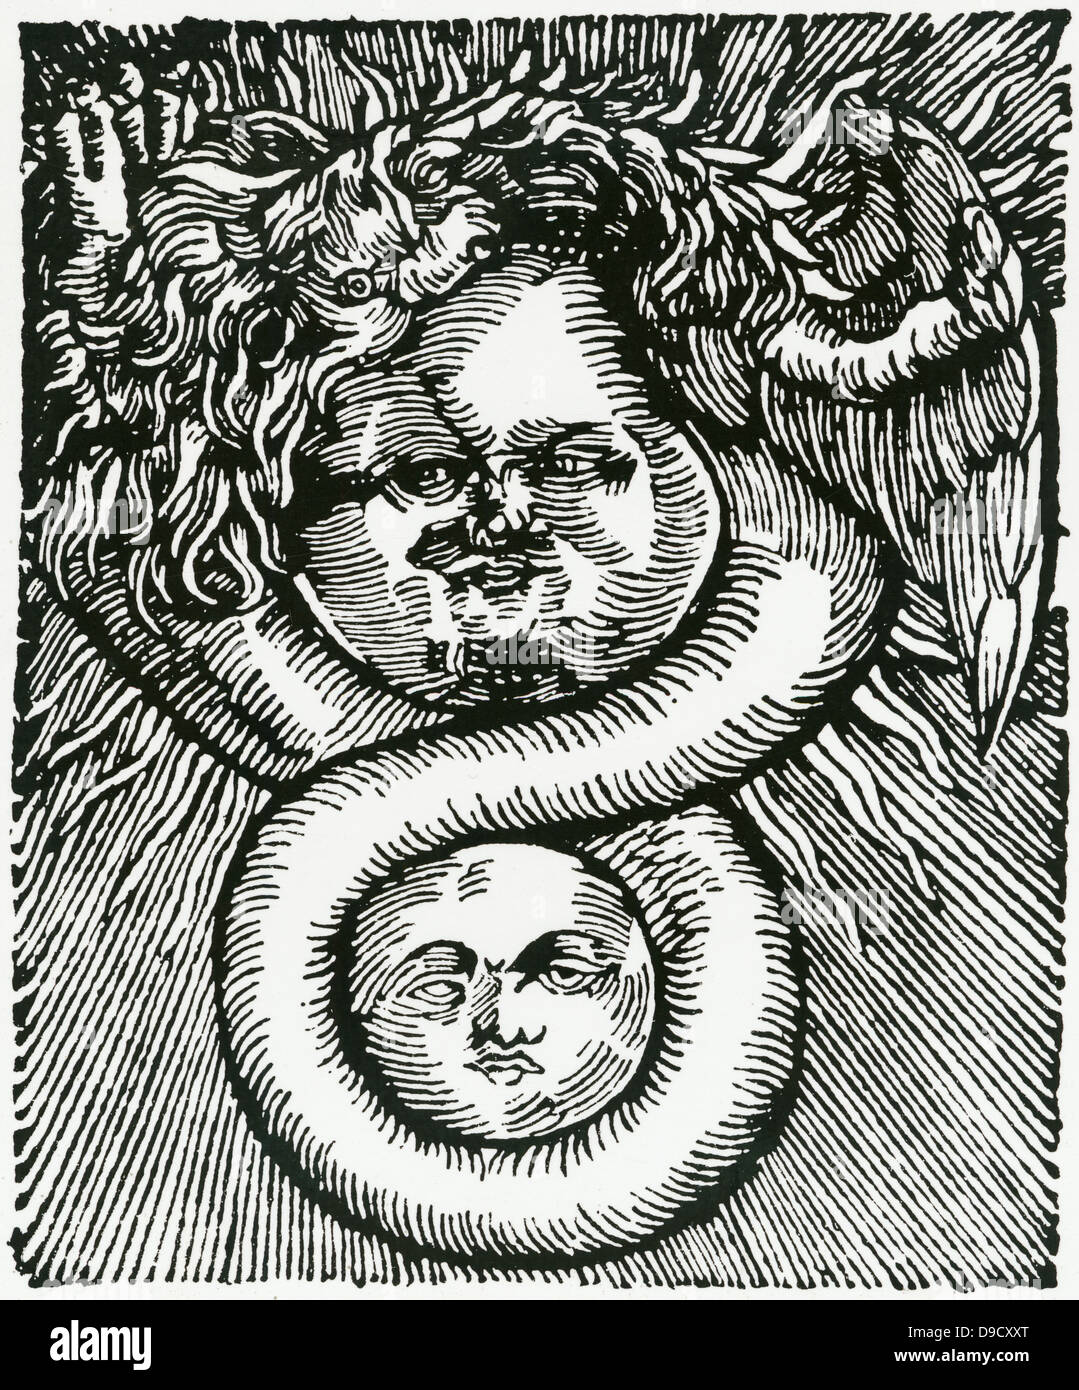 The Sun (gold) and Moon (silver) linked by the dragon (mercury and volatility). From LAzoth des philosophes, Paris, 1660, by Basil Valentine. Stock Photo